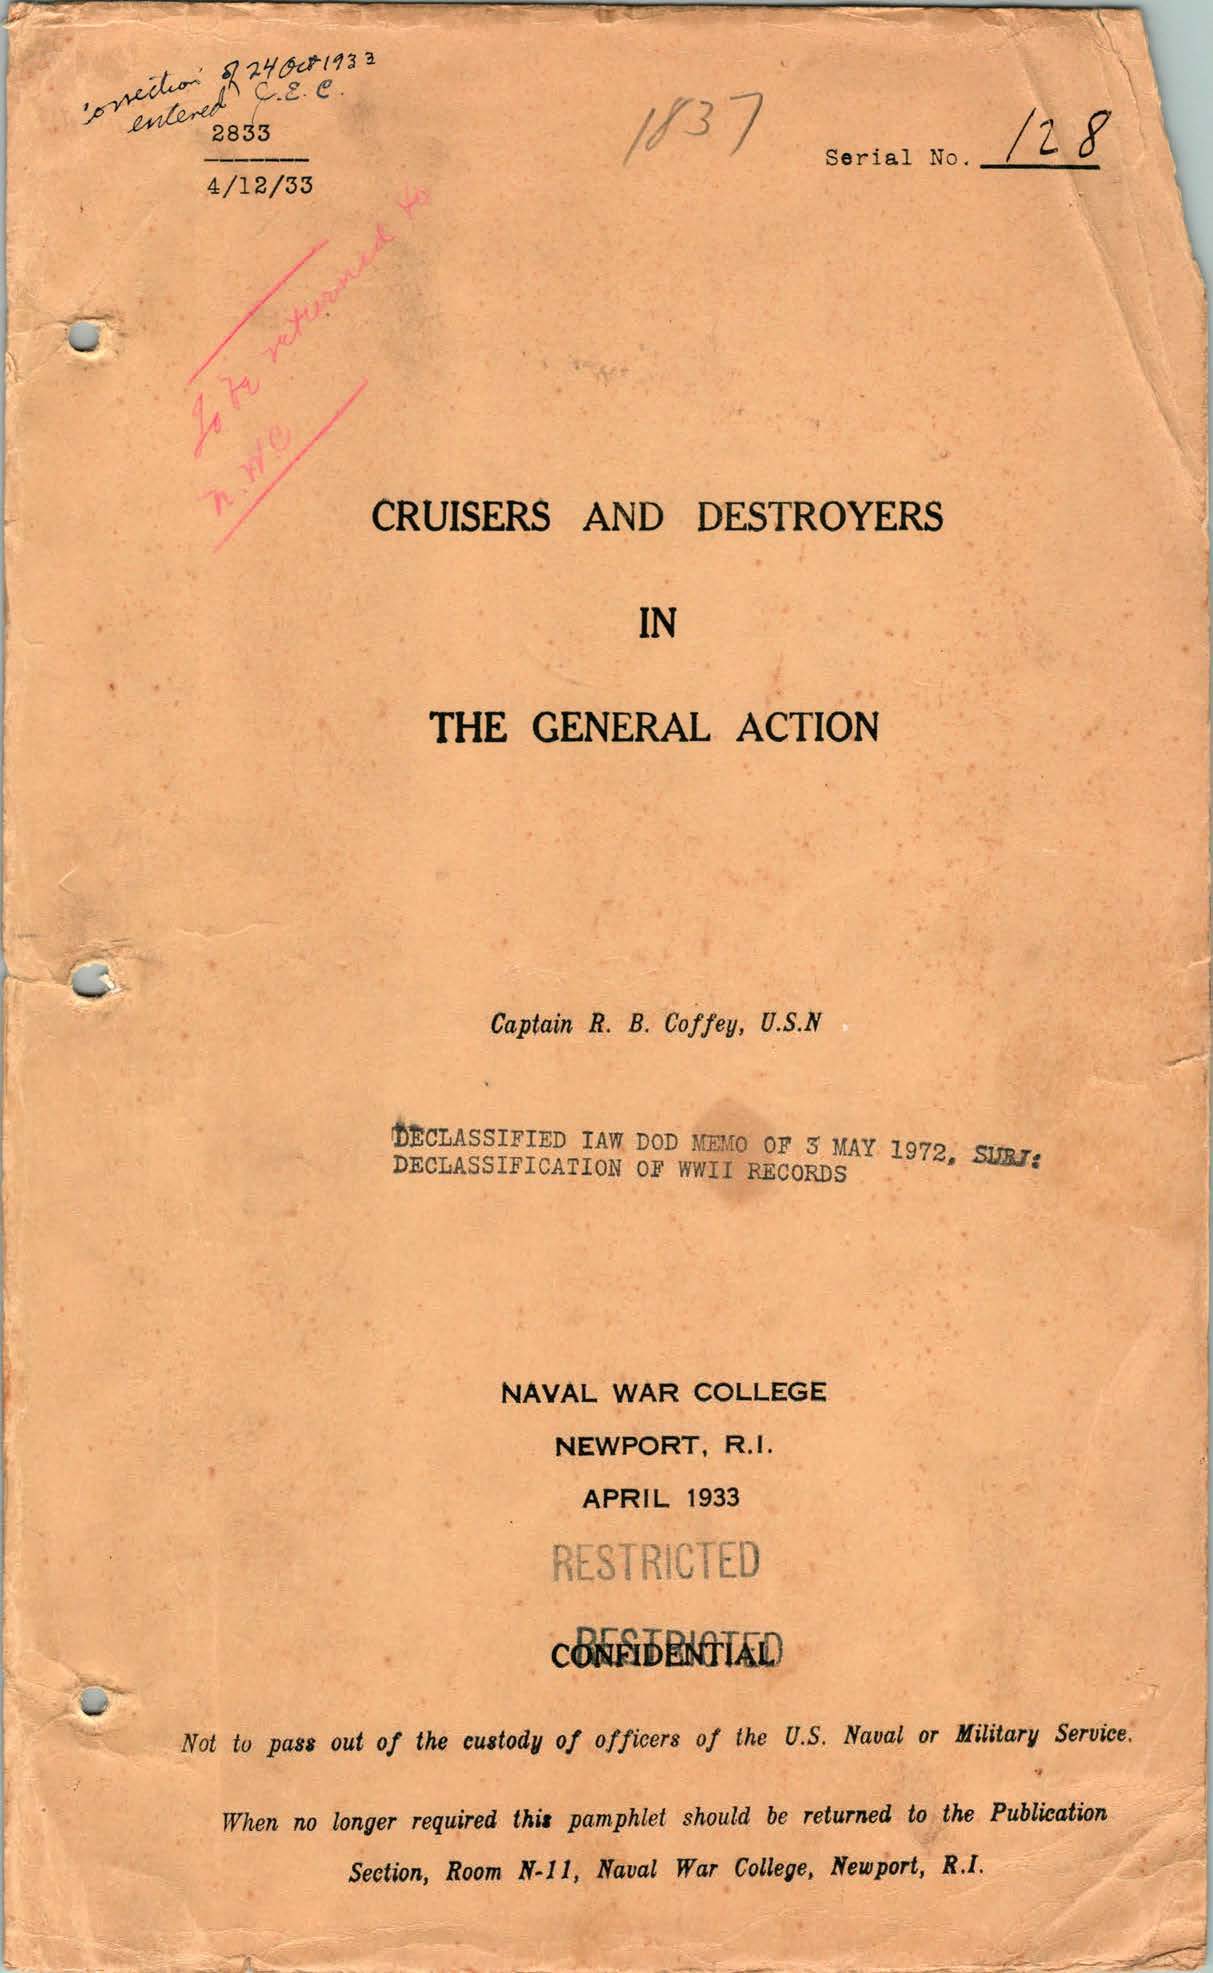 Cruisers and Destroyers in the General Action, by R. B. Coffey